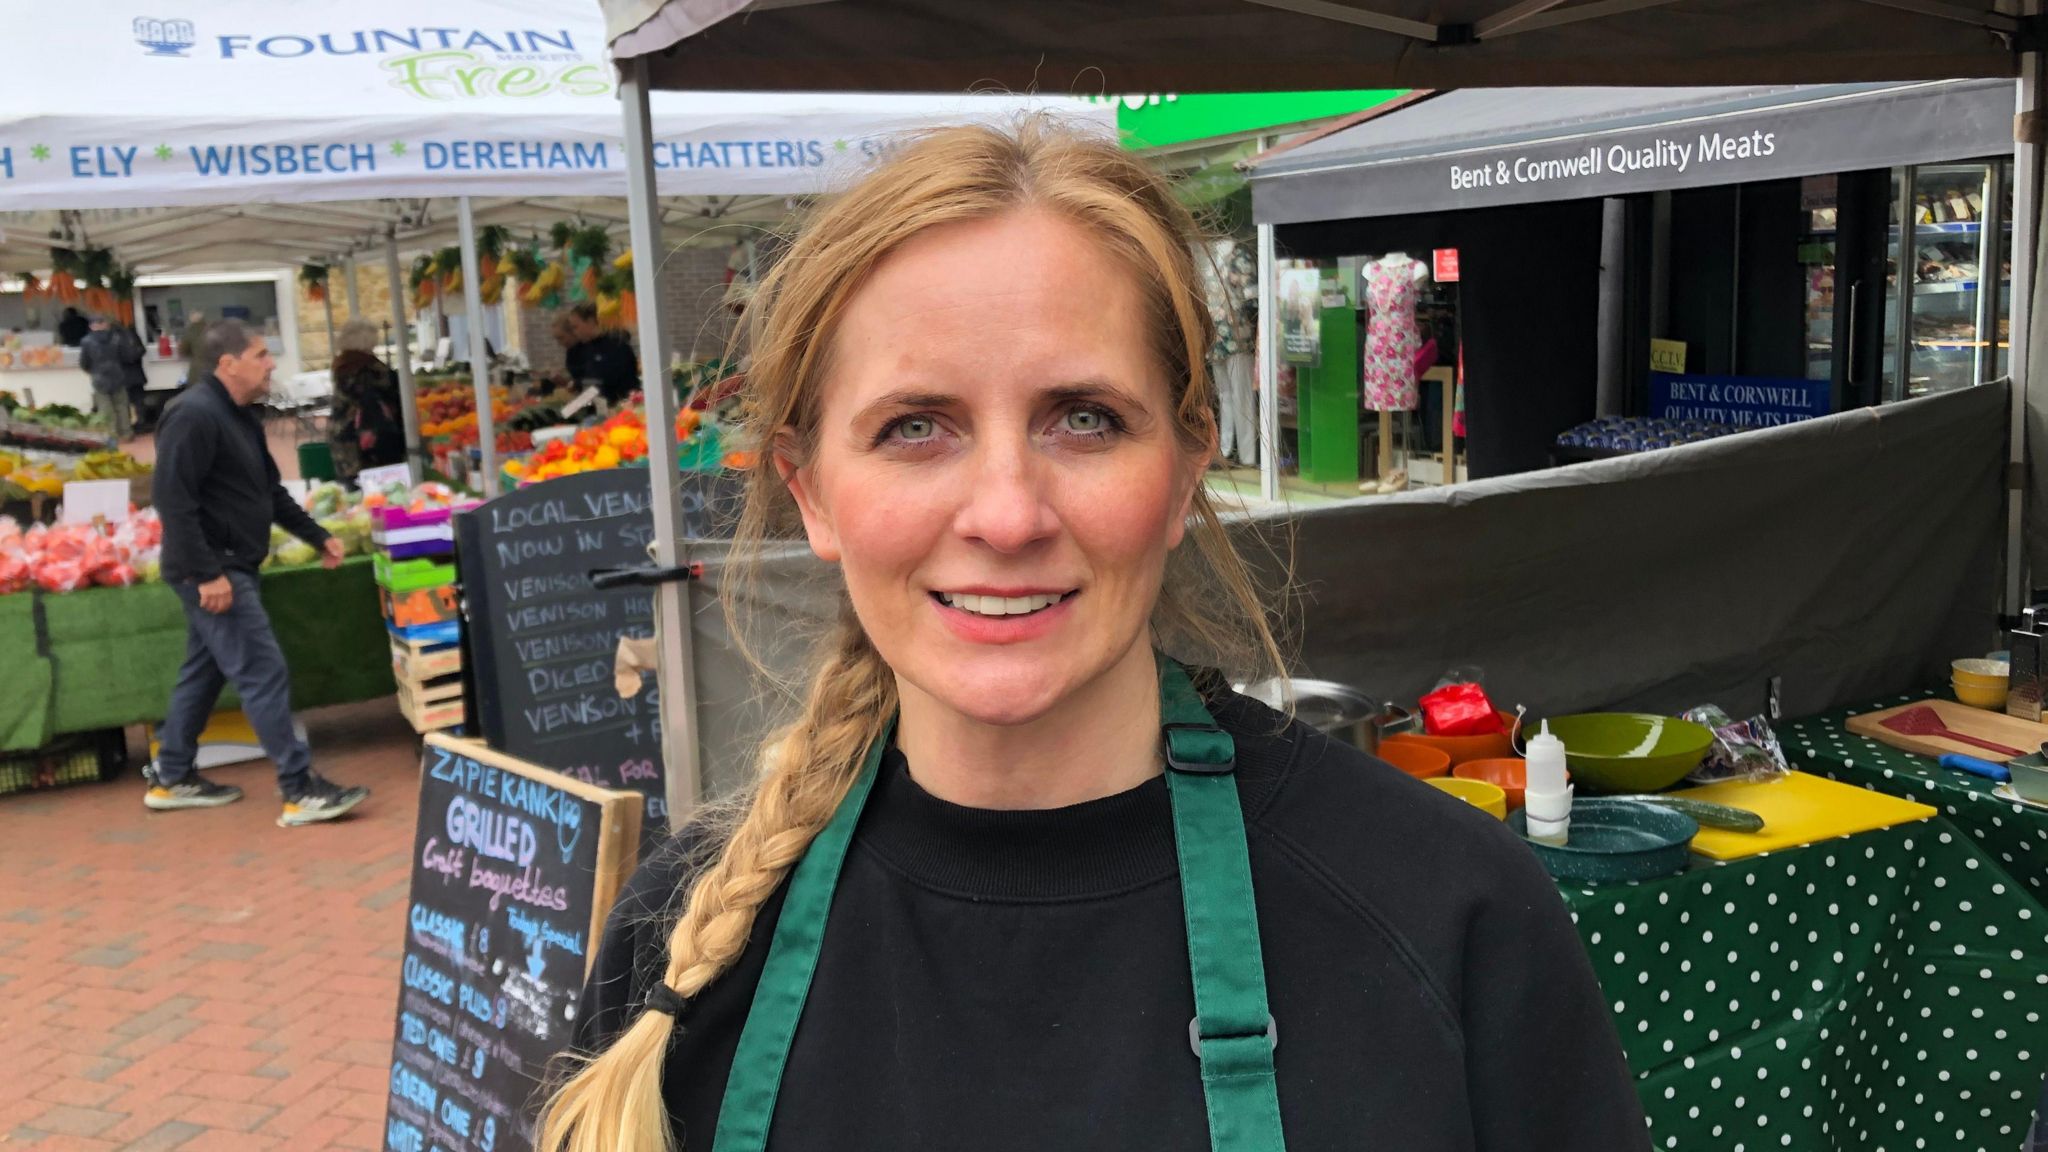 Justyna Vail in a black jumper standing in front of a market stall 